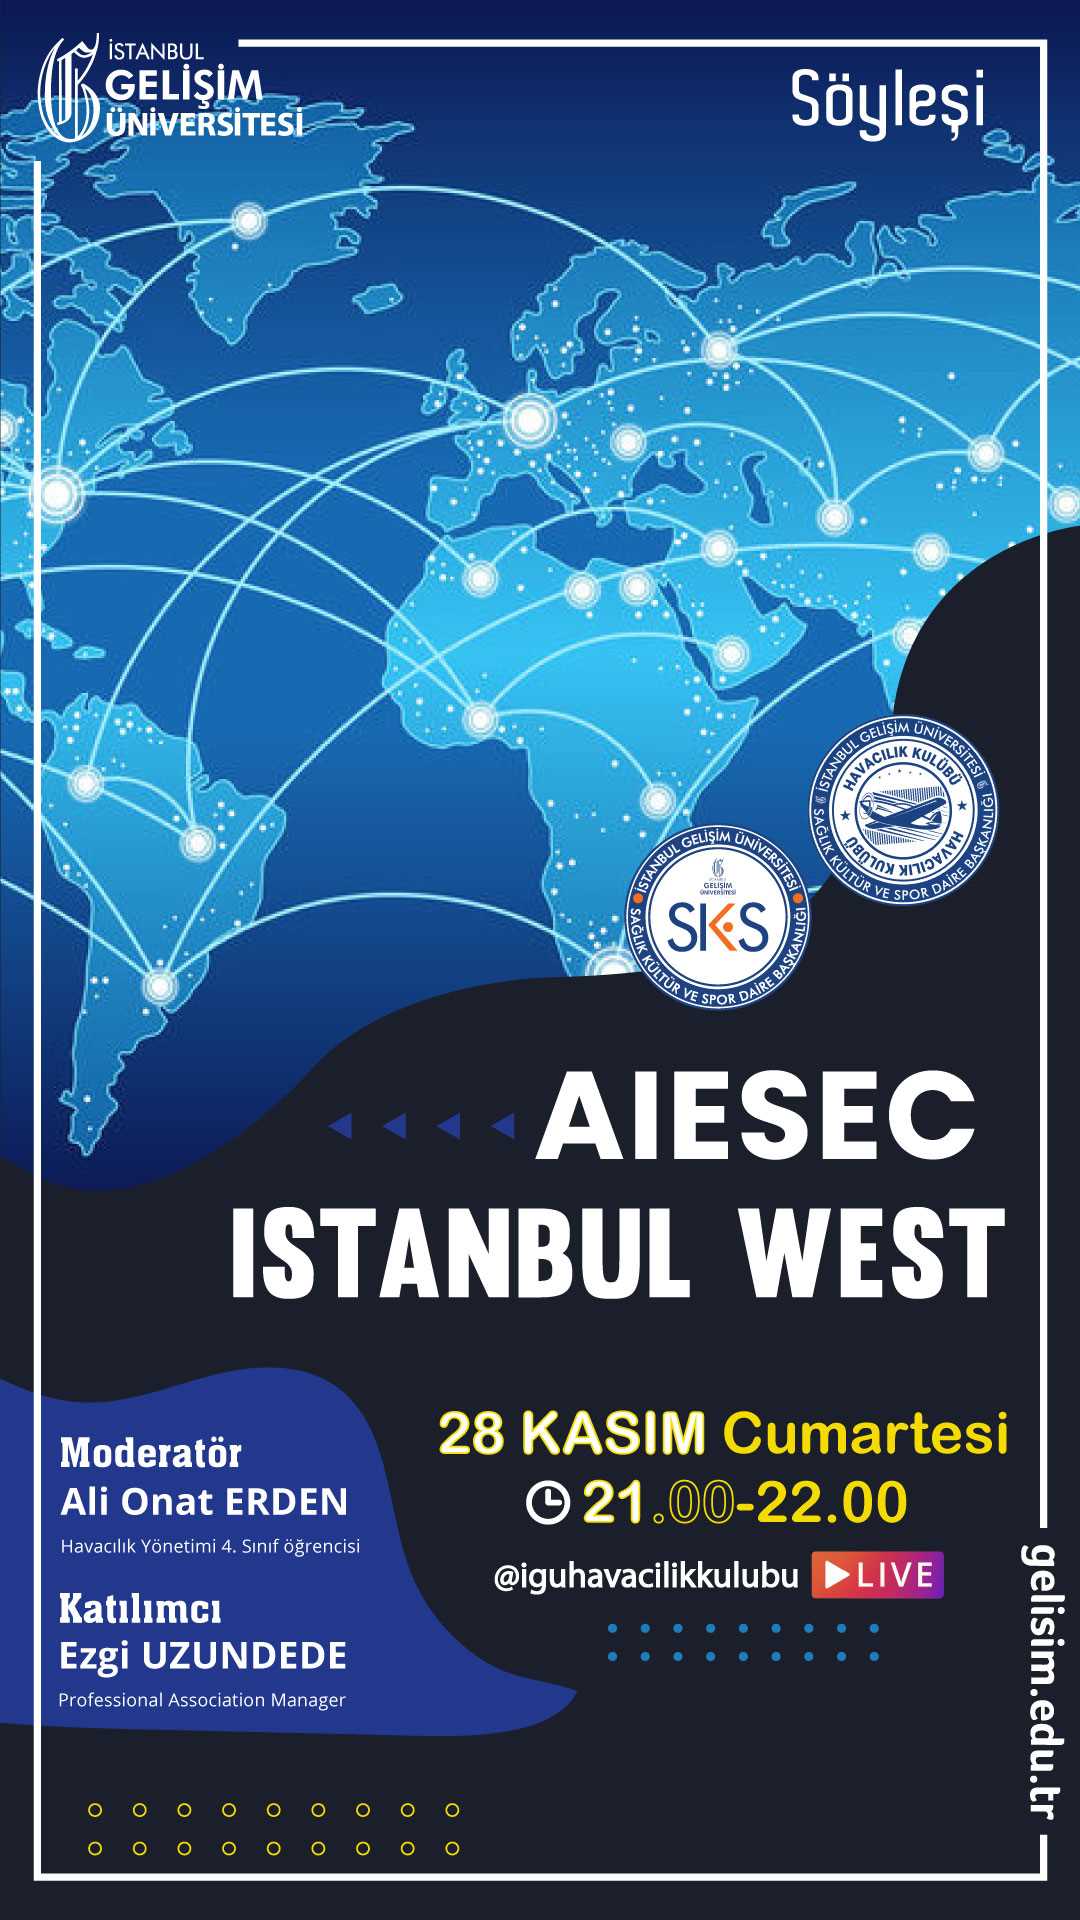 AIESEC Istanbul West